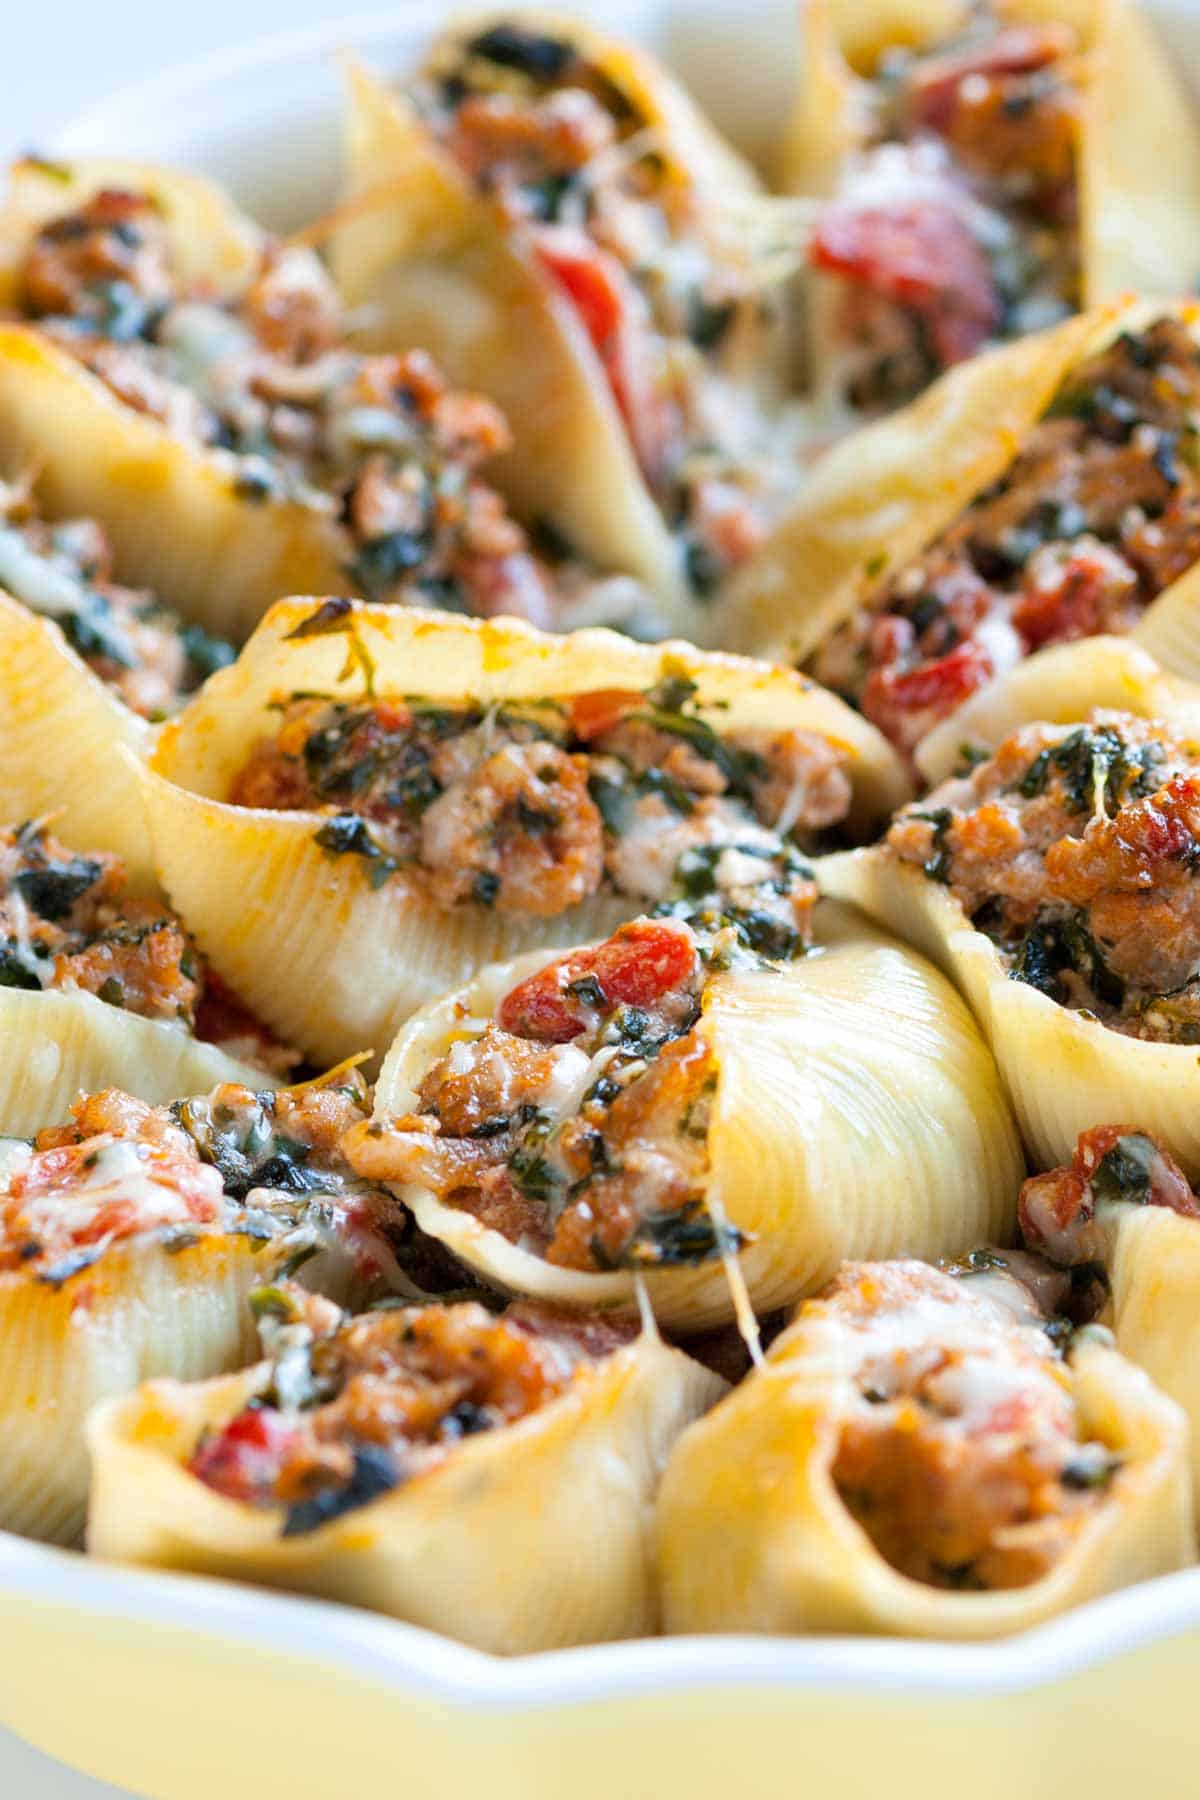 Stuffed shells filled with sausage and spinach